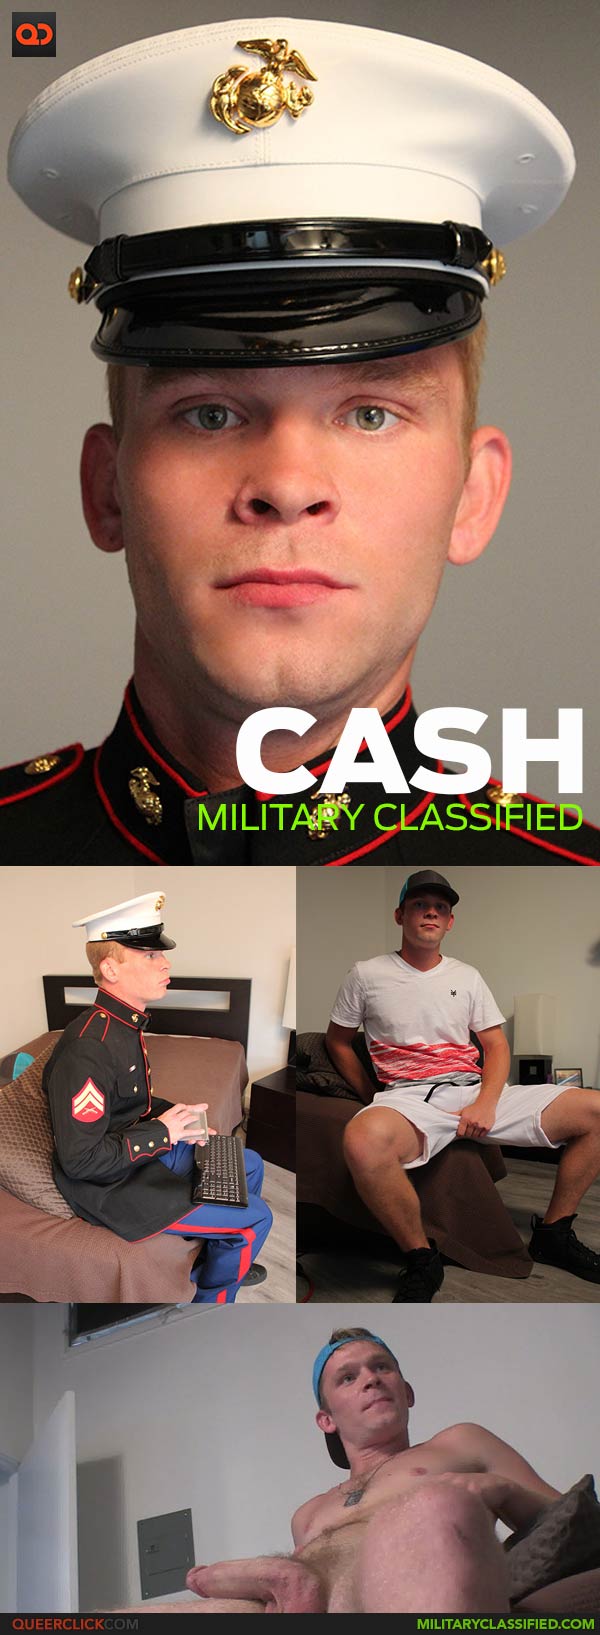 Military Classified: Cash